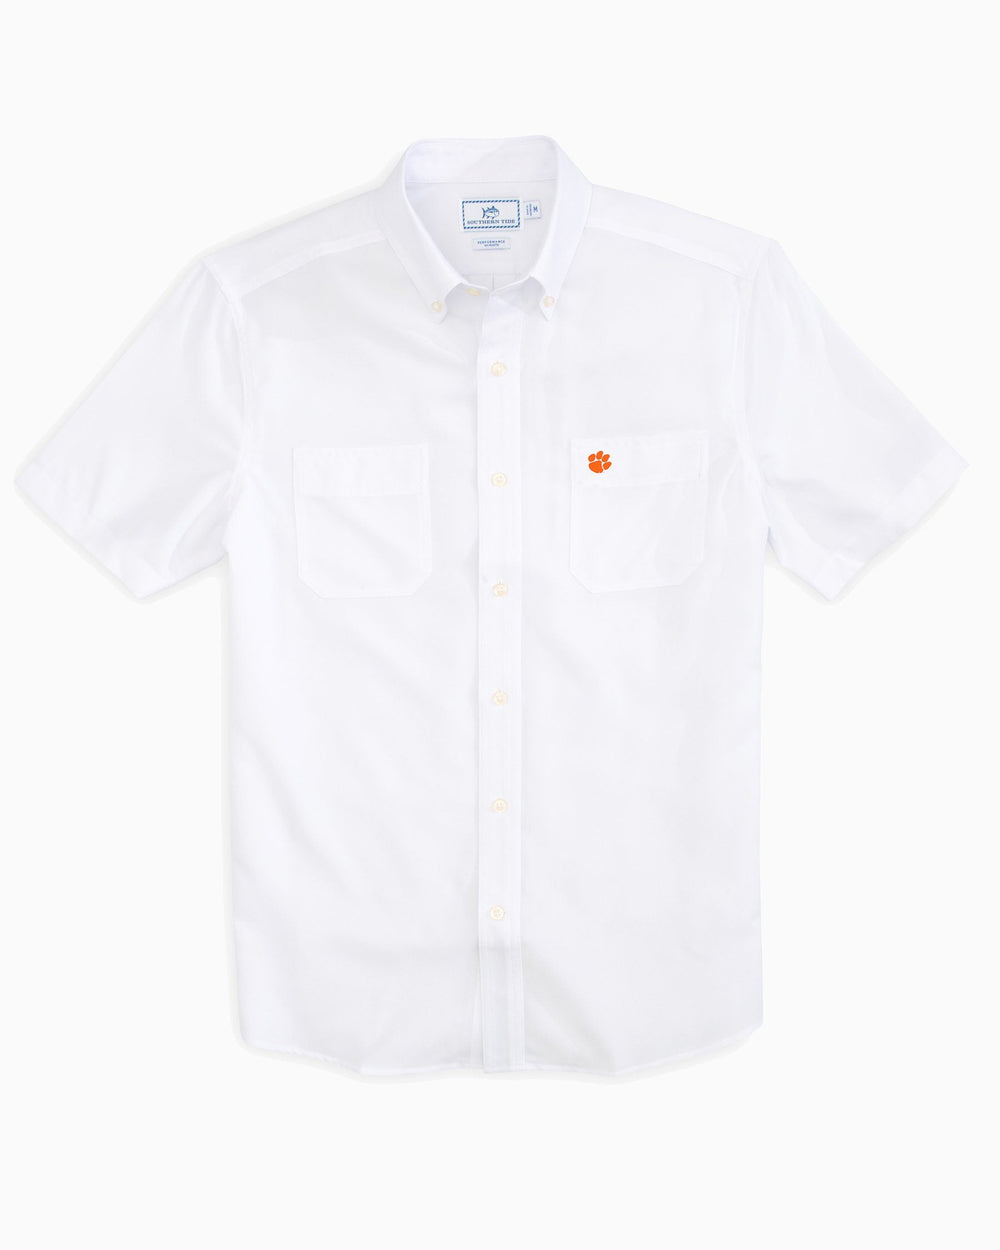 The front view of the Men's White Clemson Tigers Short Sleeve Button Down Dock Shirt by Southern Tide - Classic White